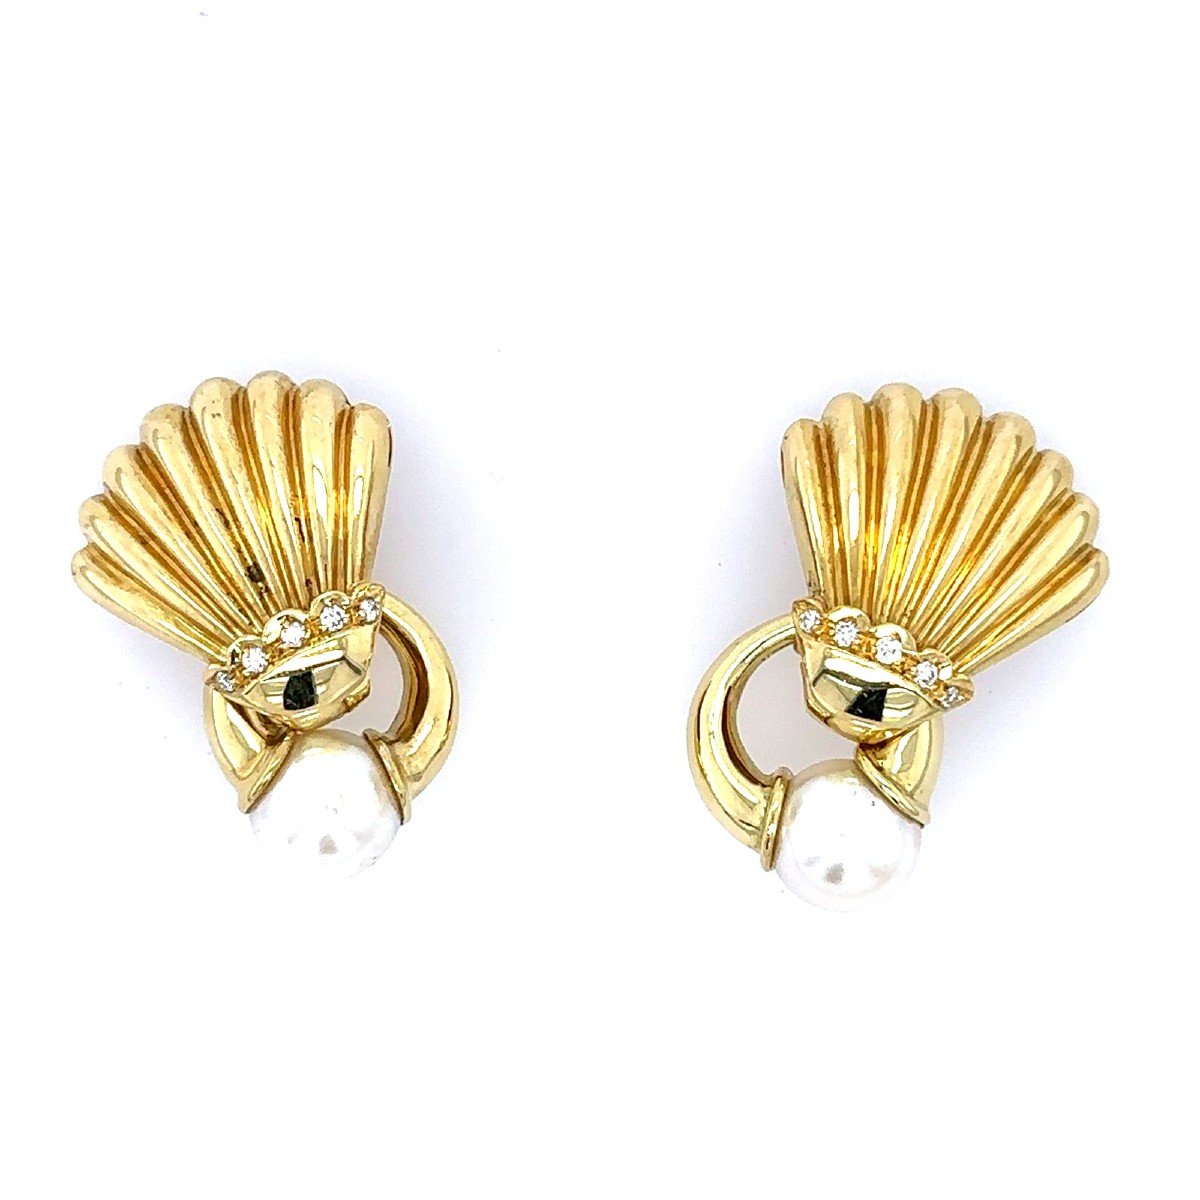 18 Kt Gold, Pearls And Diamonds Earrings.